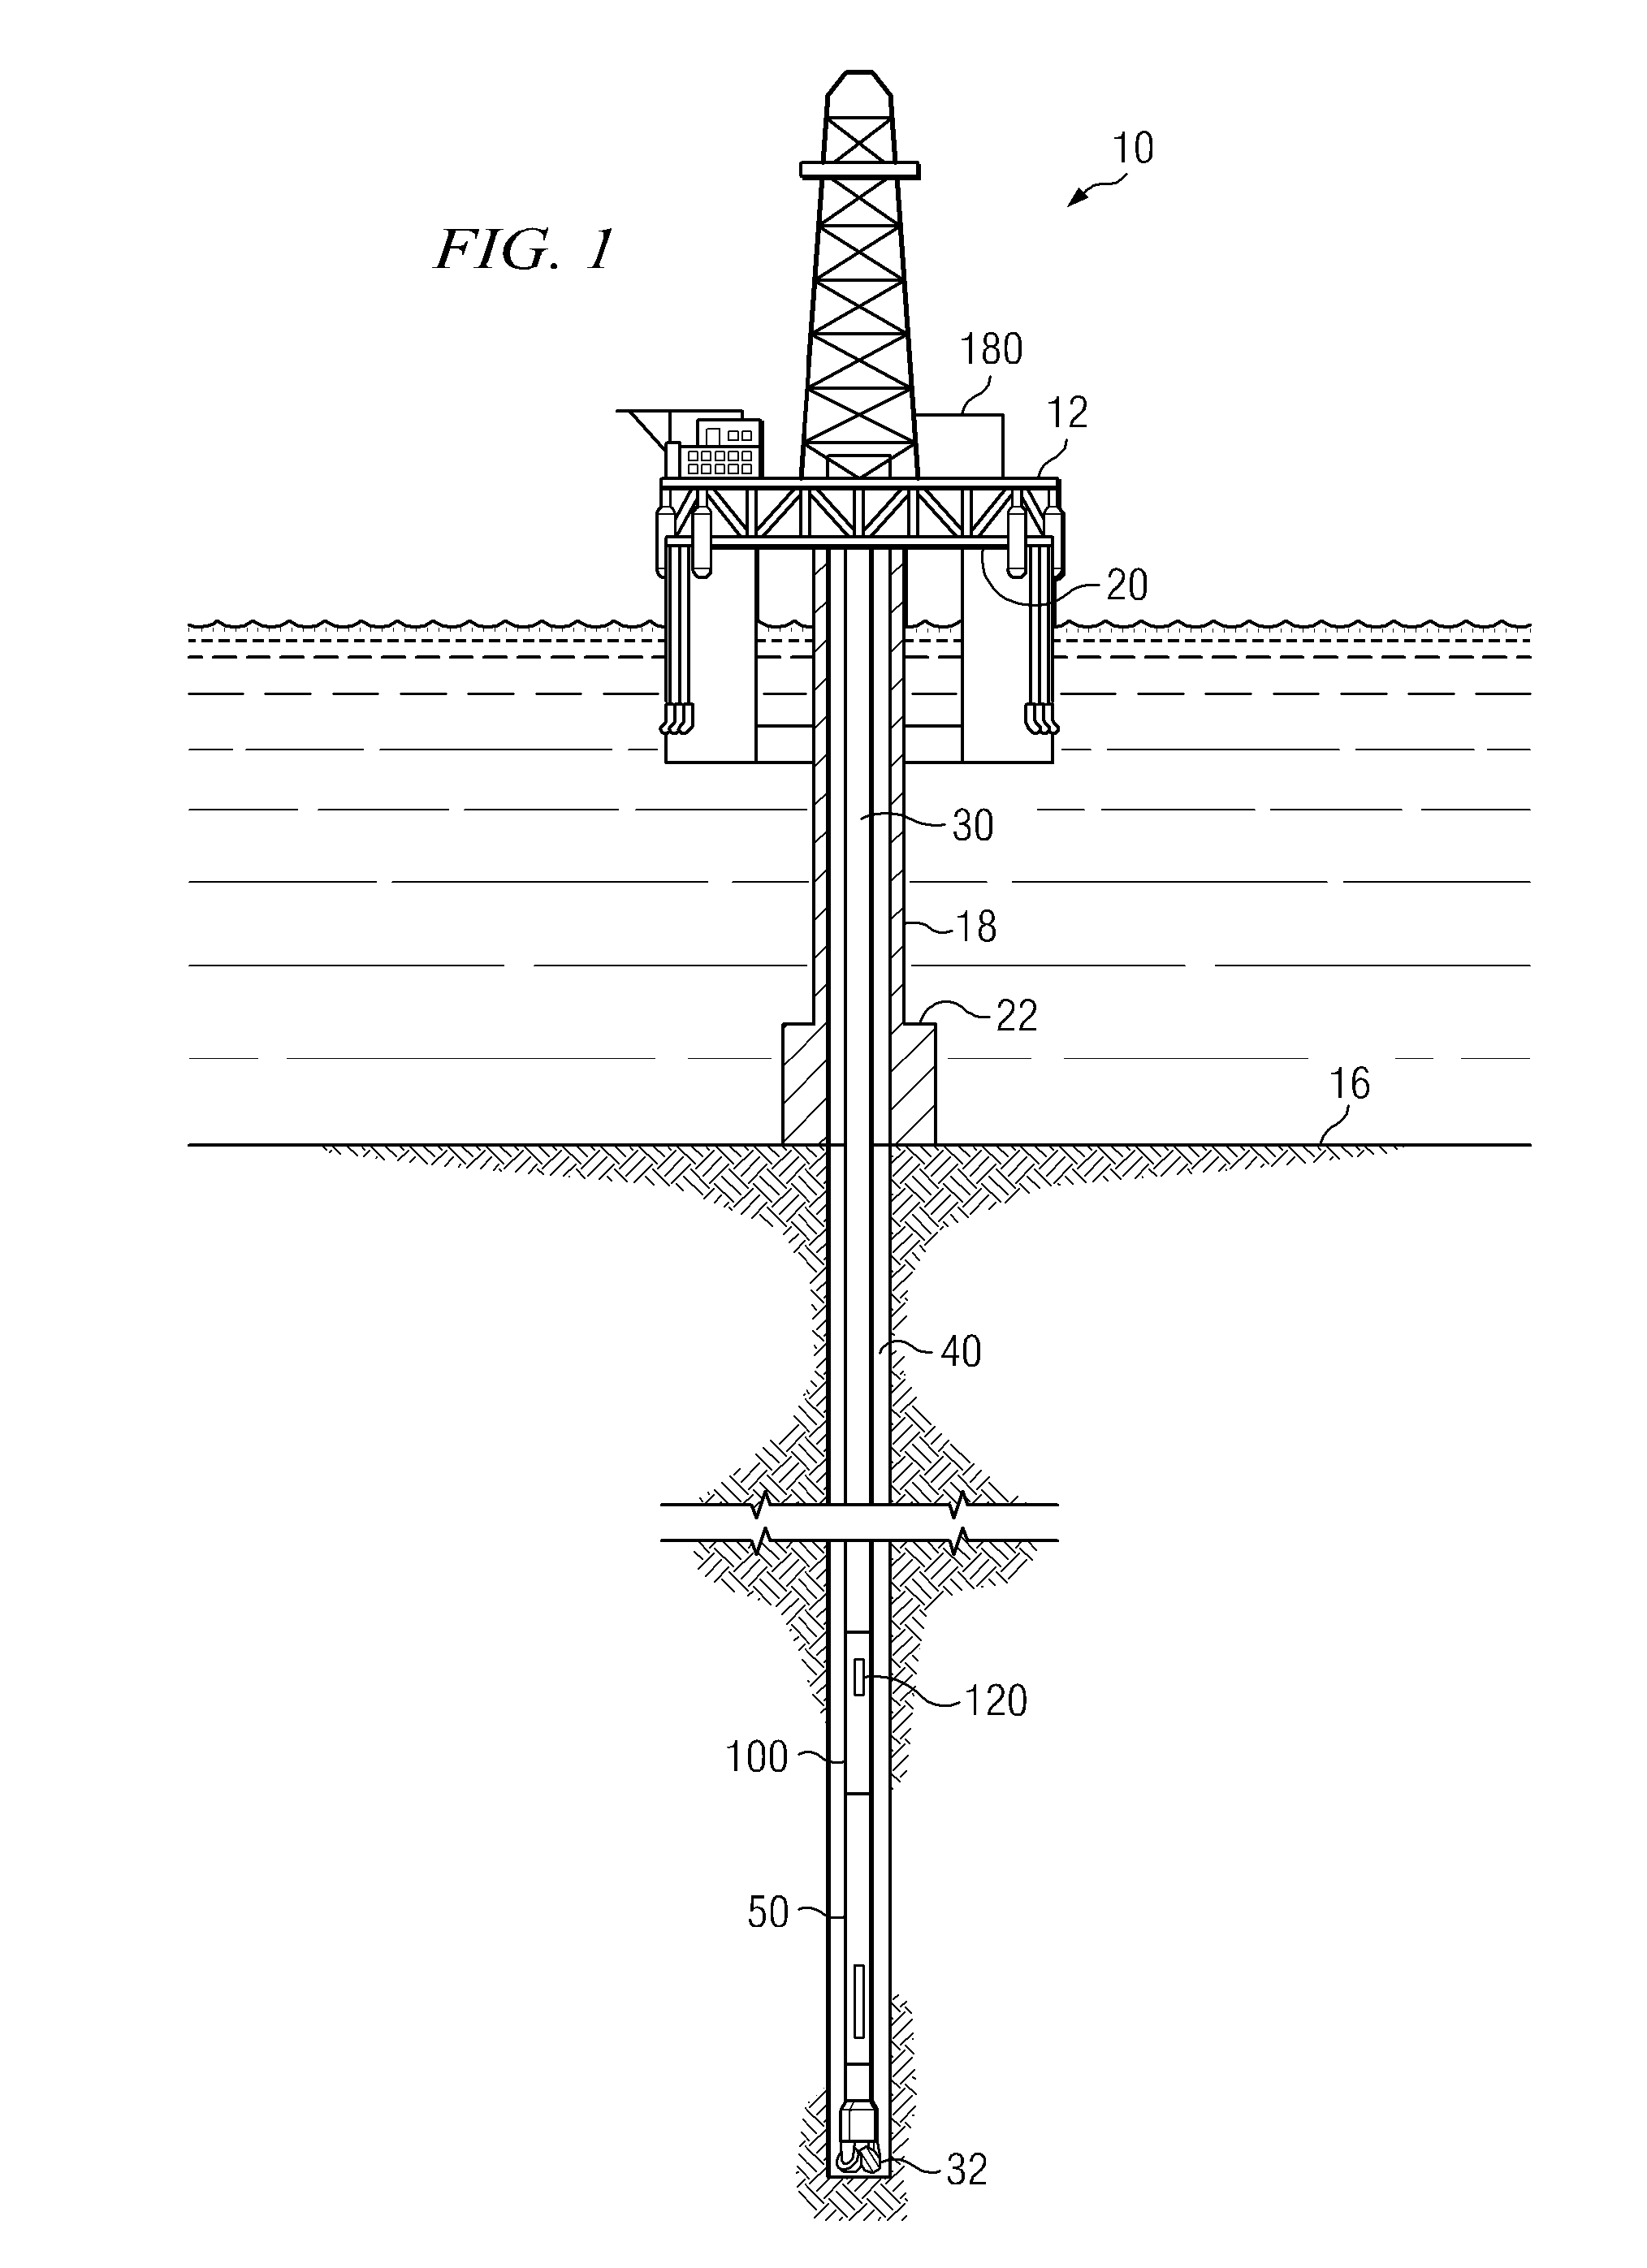 Downlinking Communication System and Method